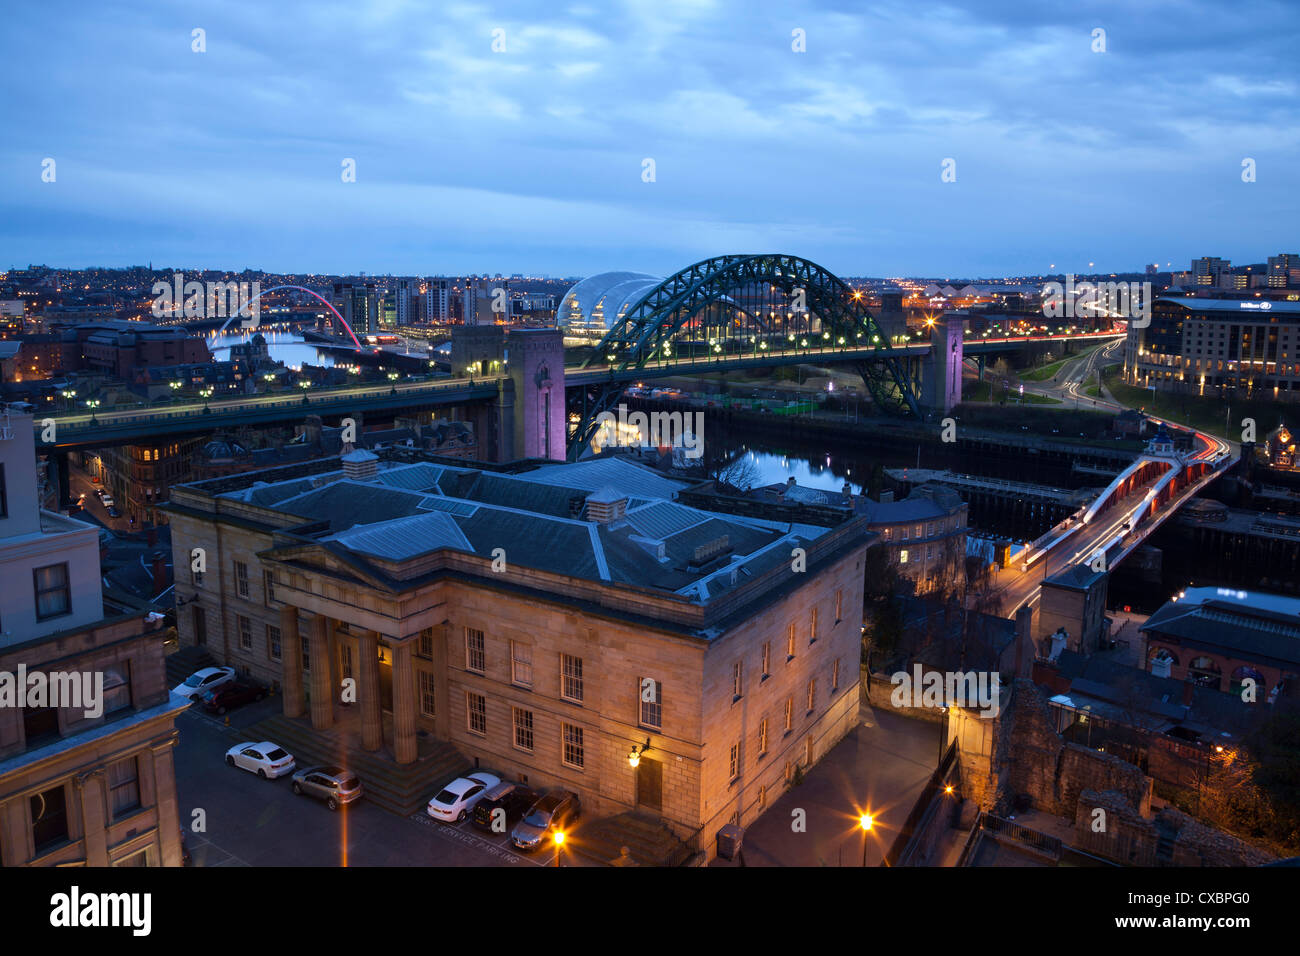 View of the Newcastle Gateshead Quayside from the Castle Stock Photo